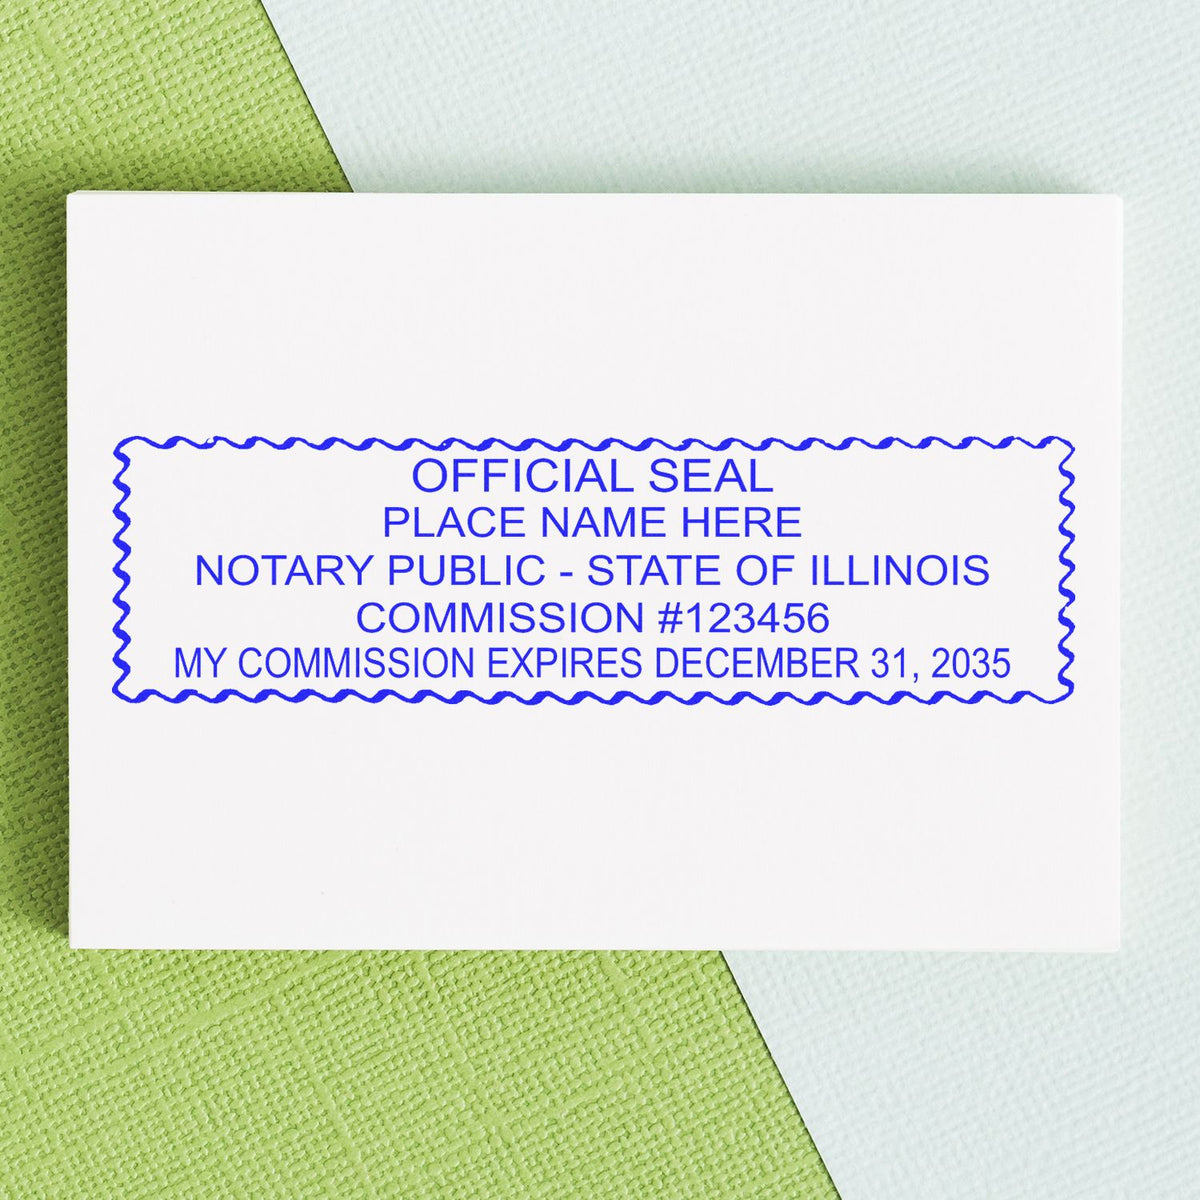 Slim Pre-Inked Rectangular Notary Stamp for Illinois in use photo showing a stamped imprint of the Slim Pre-Inked Rectangular Notary Stamp for Illinois